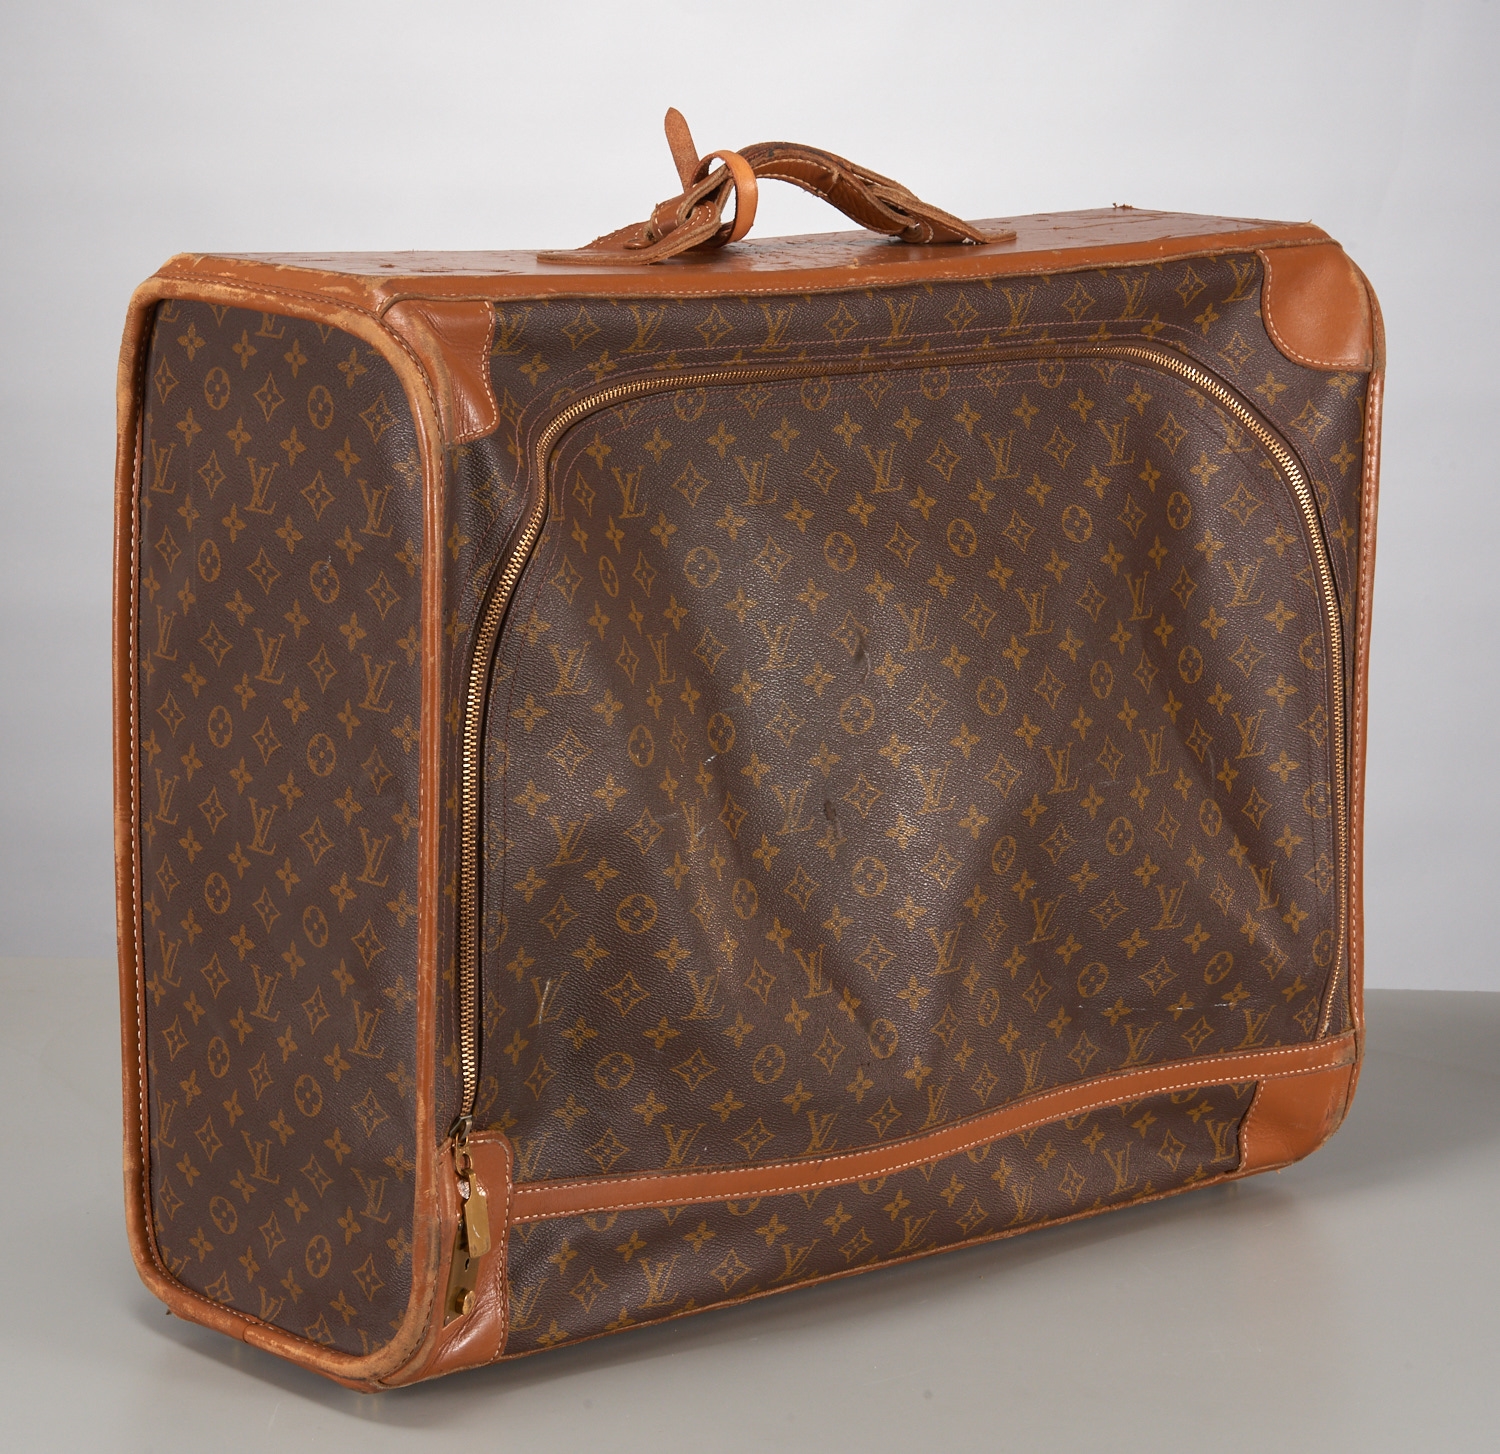 Lot - A VINTAGE LOUIS VUITTON HARD SHELL LUGGAGE GROUP